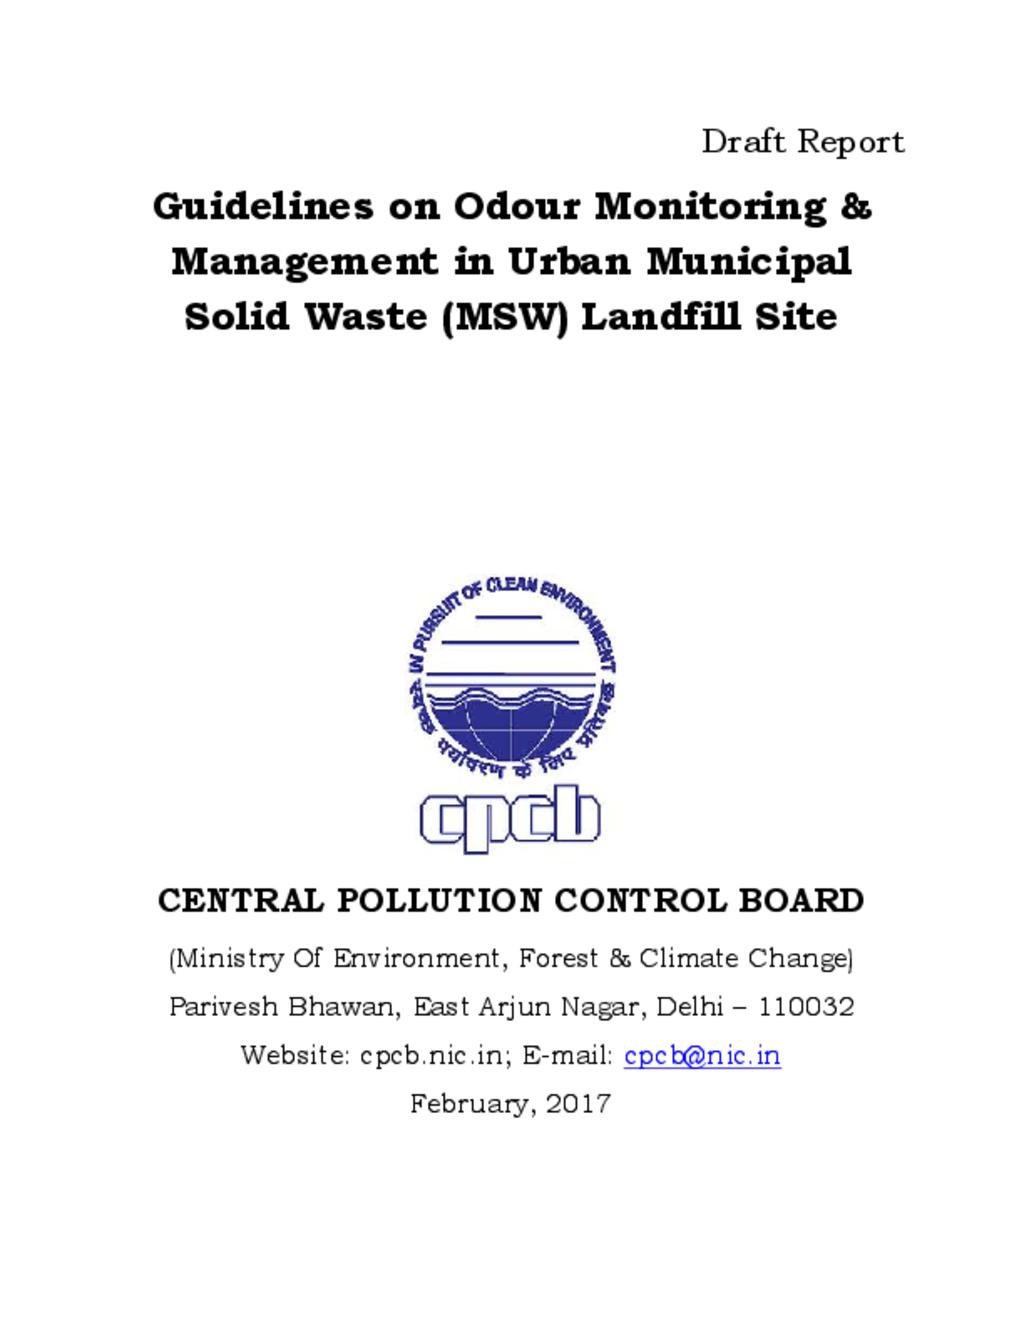 Odour control Guidelines